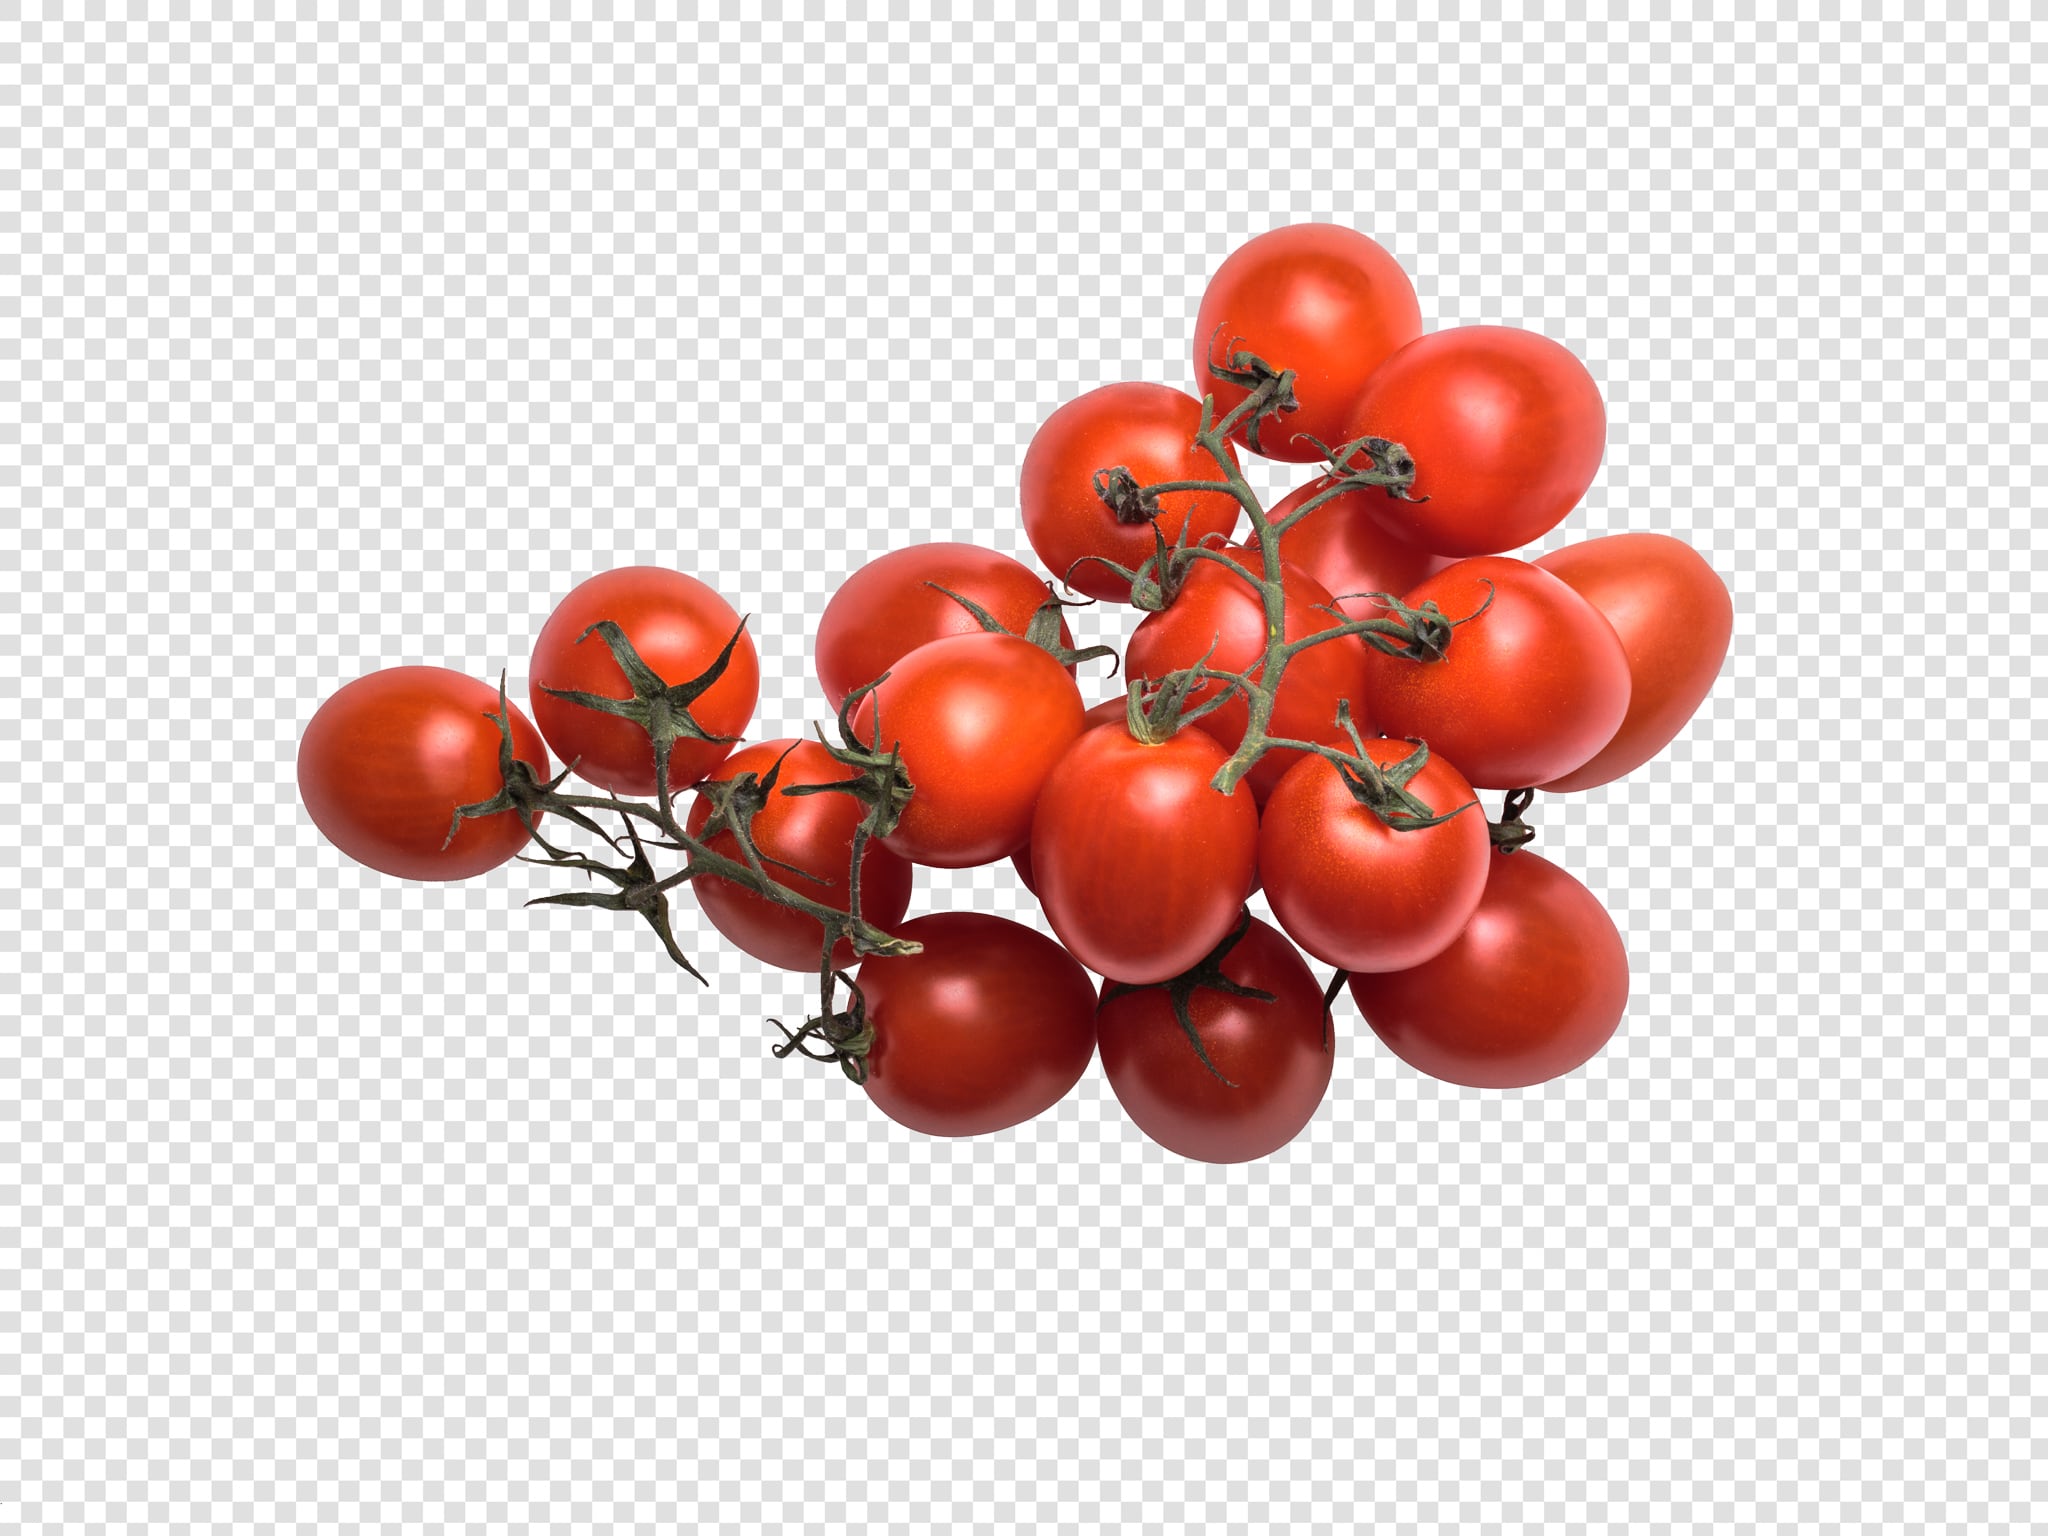 Cherry PSD image with transparent background